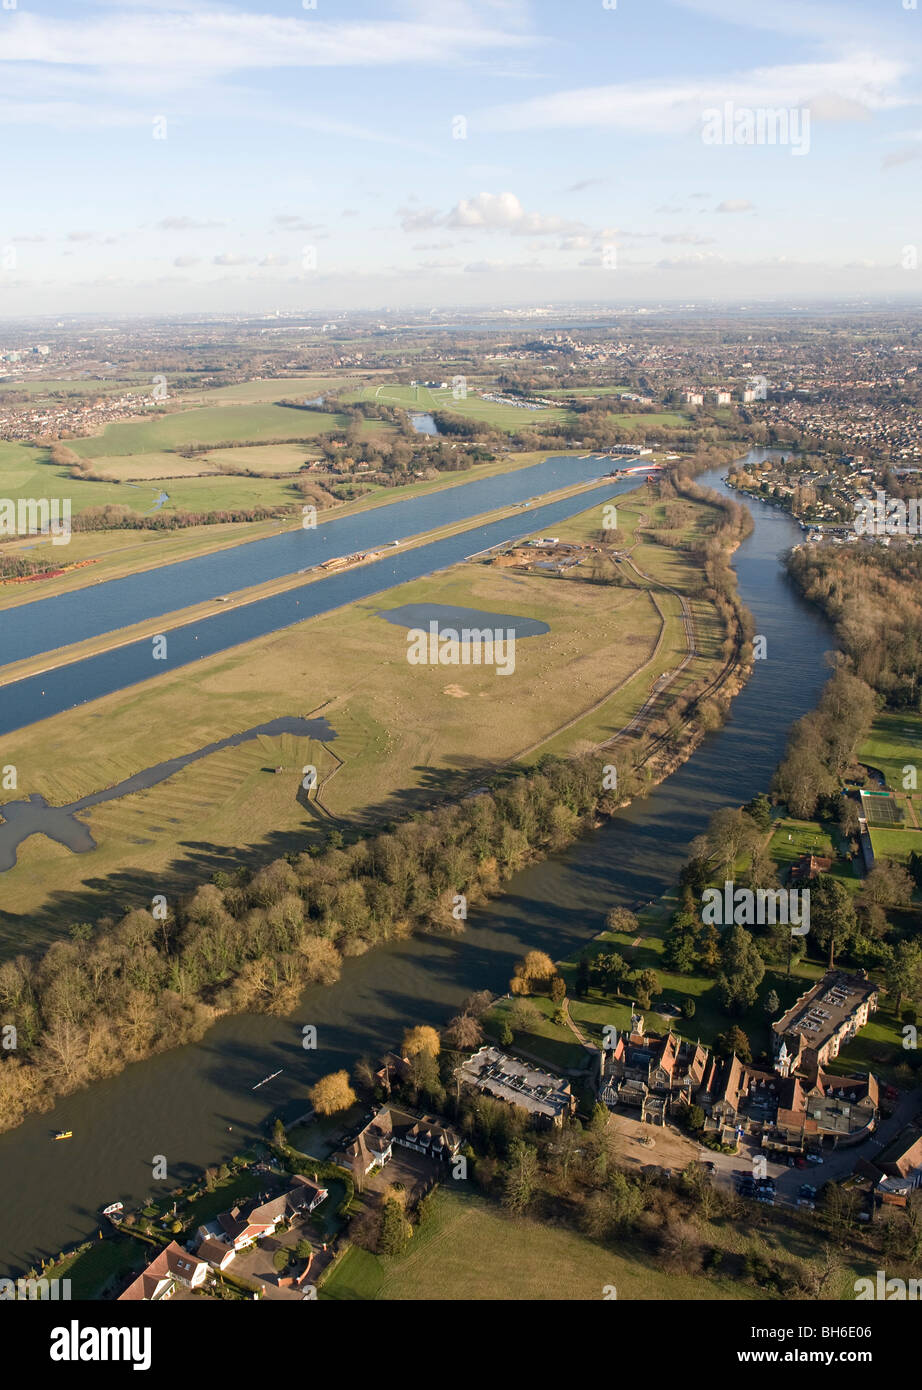 AERIAL VIEW OF DORNEY LAKES, ROWING CENTRE FOR ETON COLLEGE , WHICH WILL BE USED AS AN OLYMPIC VENUE IN 2012. Stock Photo